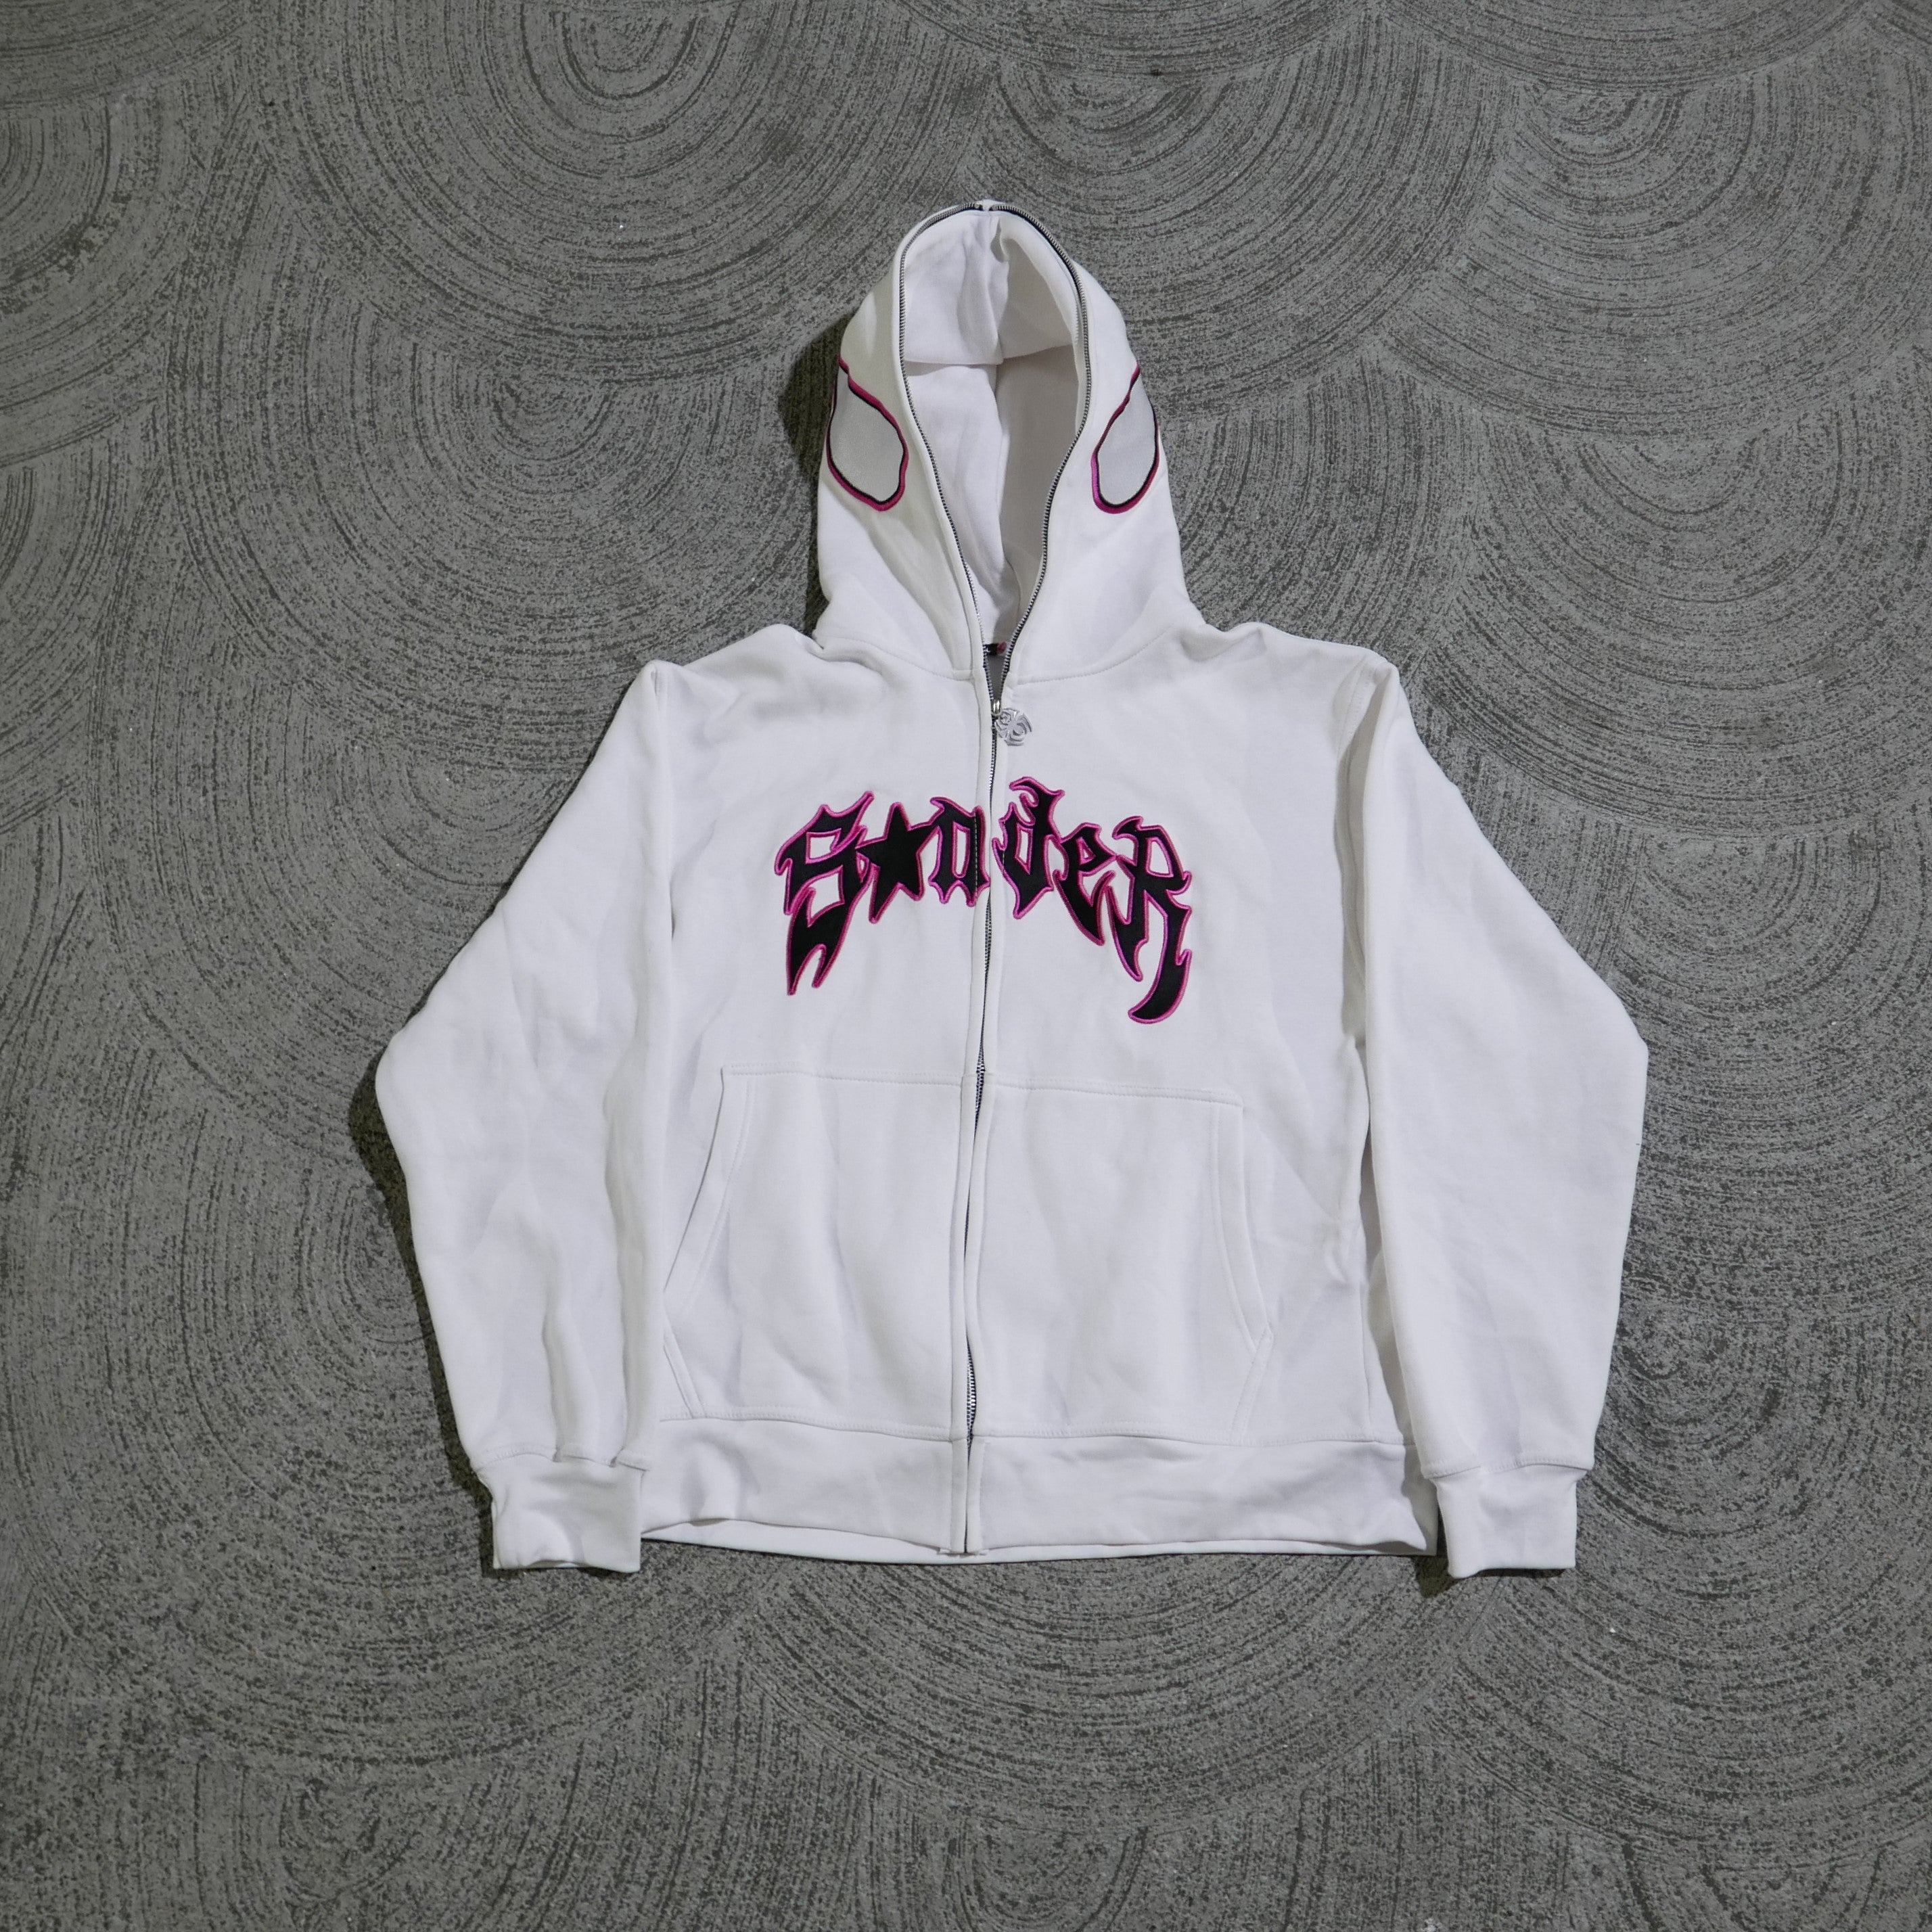 Spider Full-Zip in White and Pink